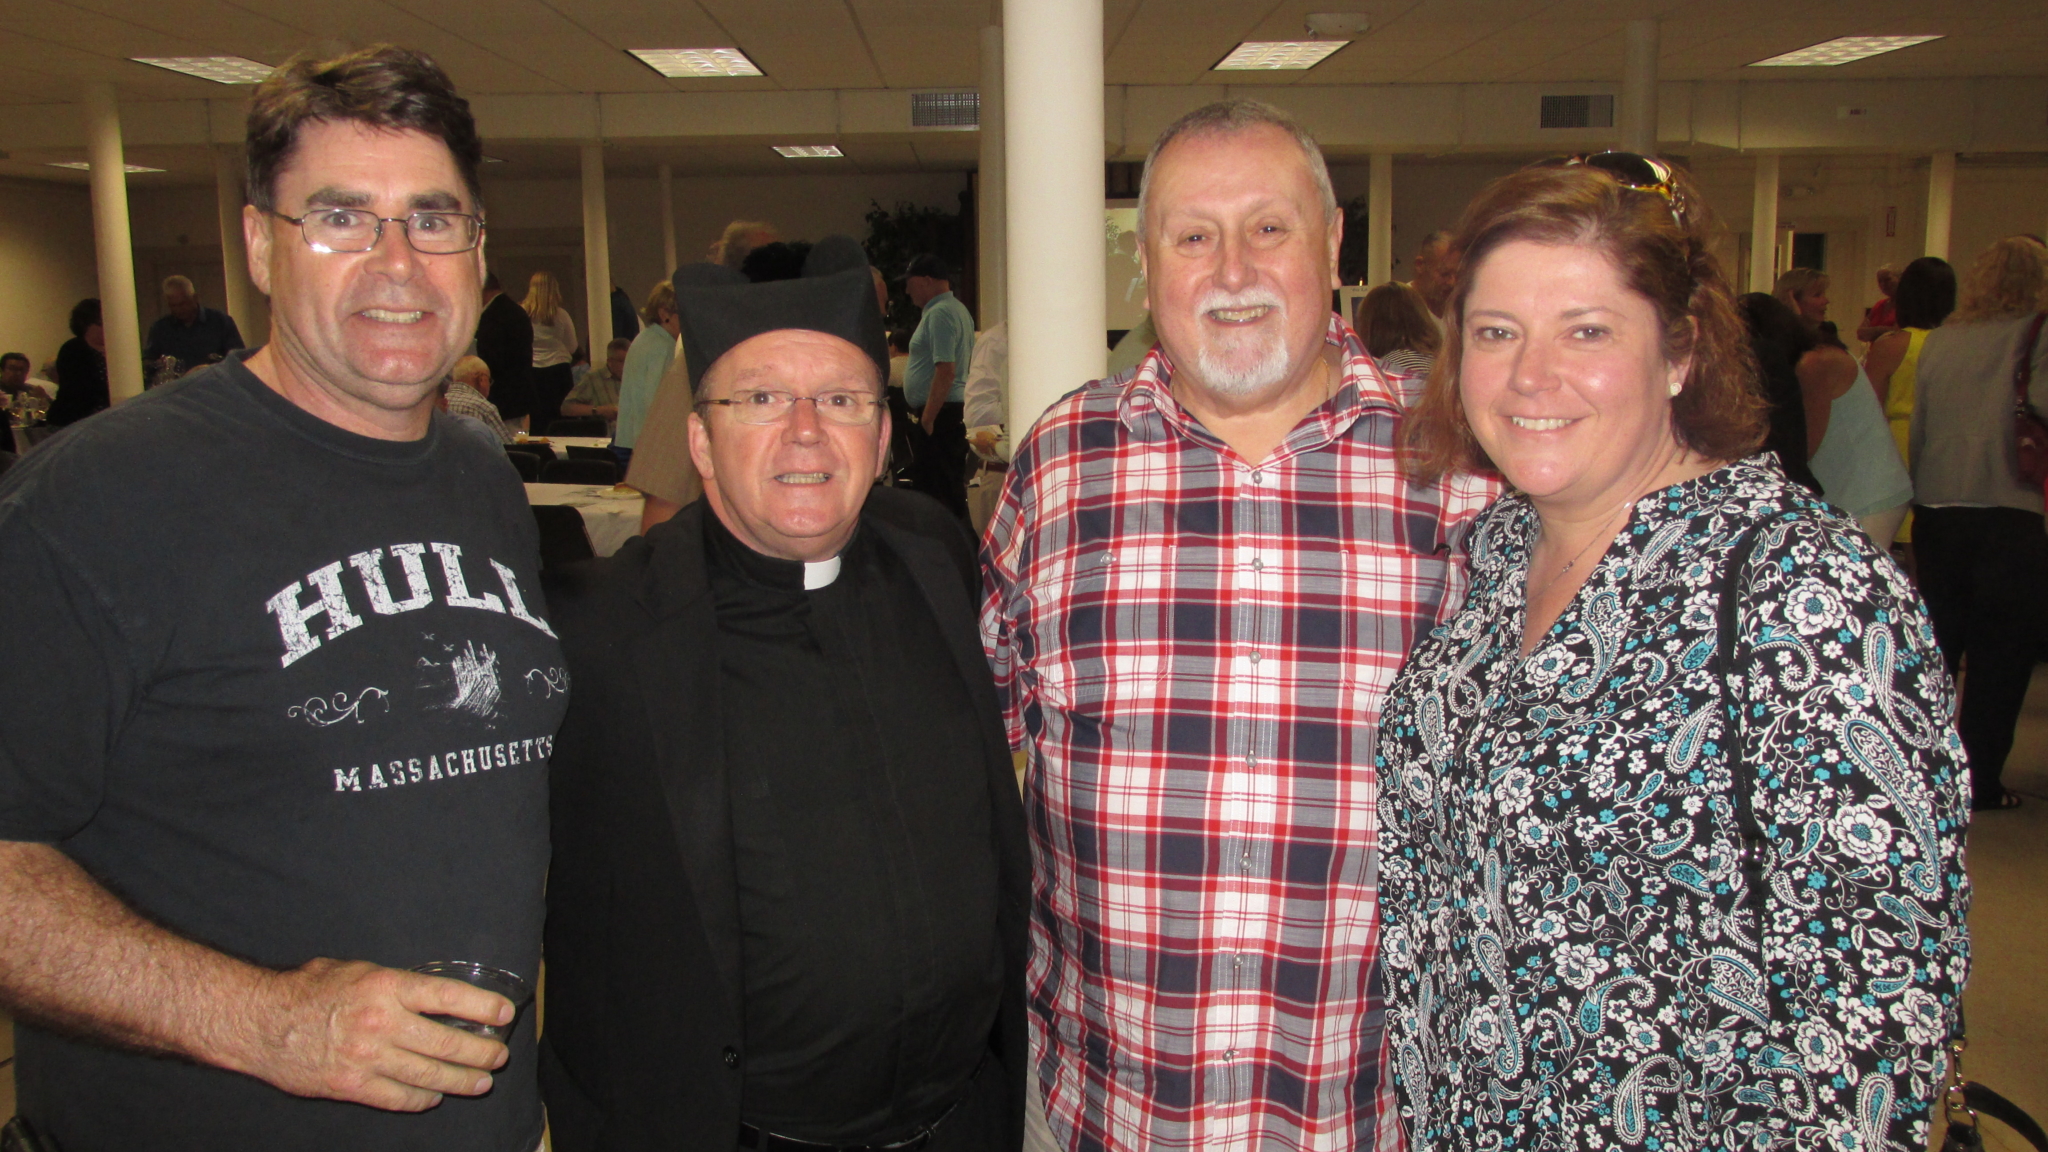 Fr. Joe (check that biretta!) with a few of his 500 well-wishers at his 25th Anniversary Celebration – Philip, Peter, and Helena (with an “a”).